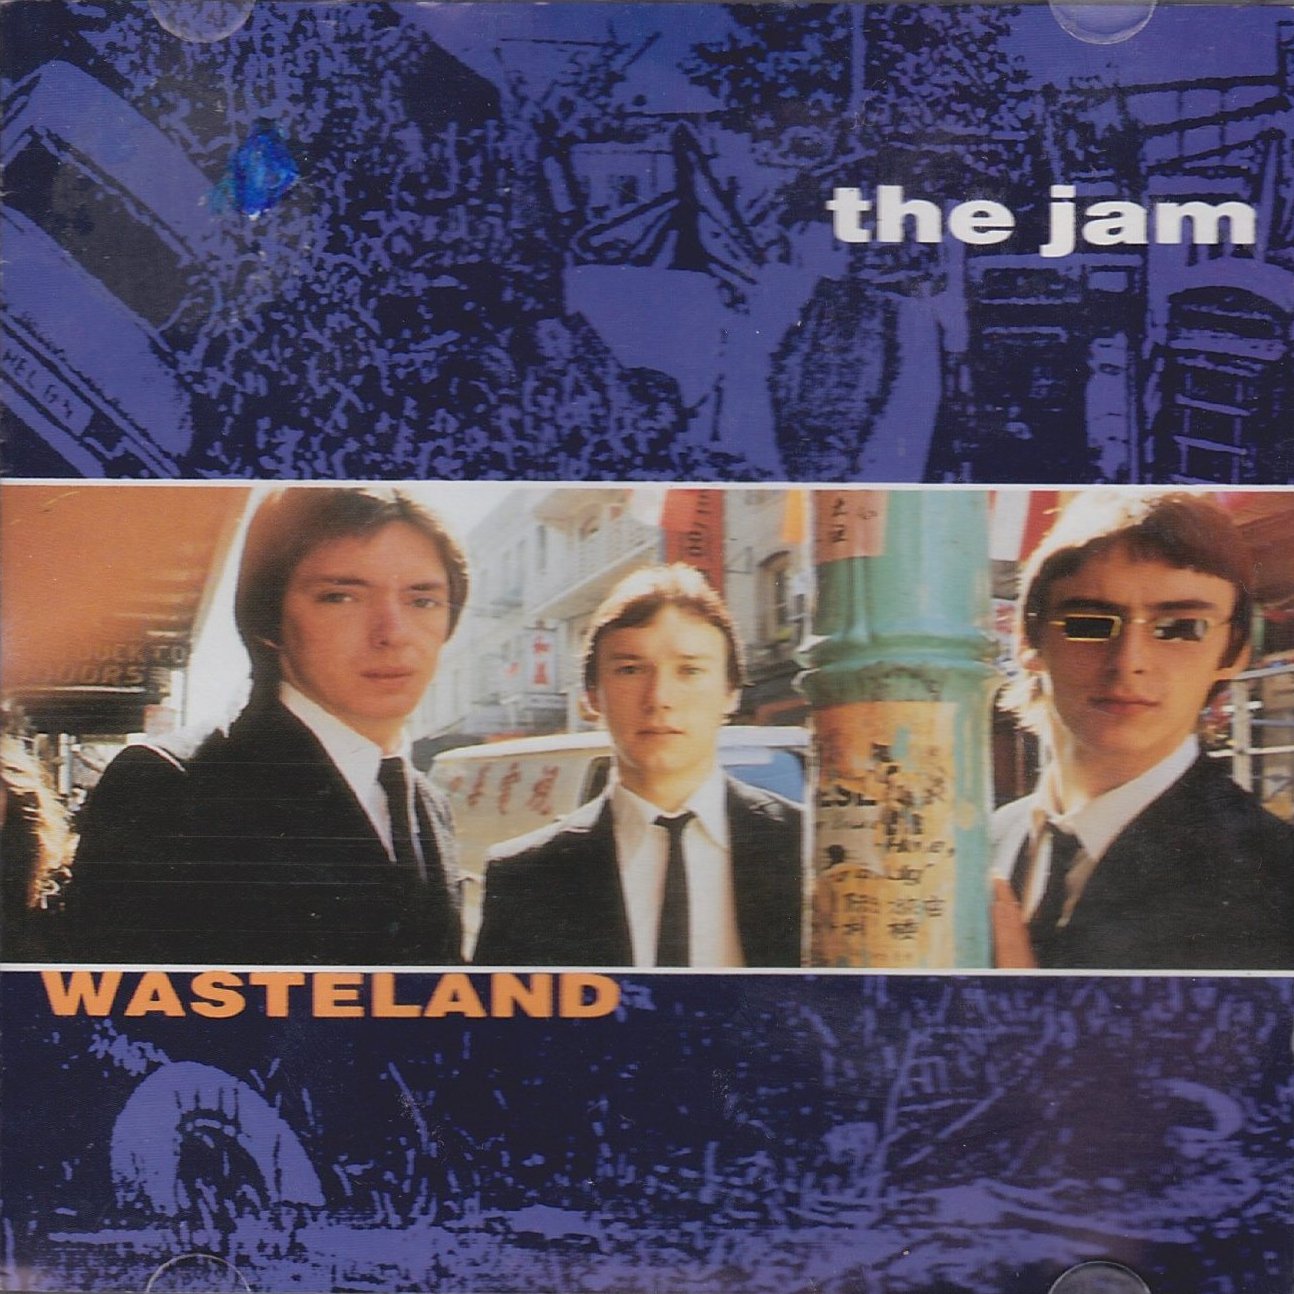 The Jam compilation album, Wasteland, front cover